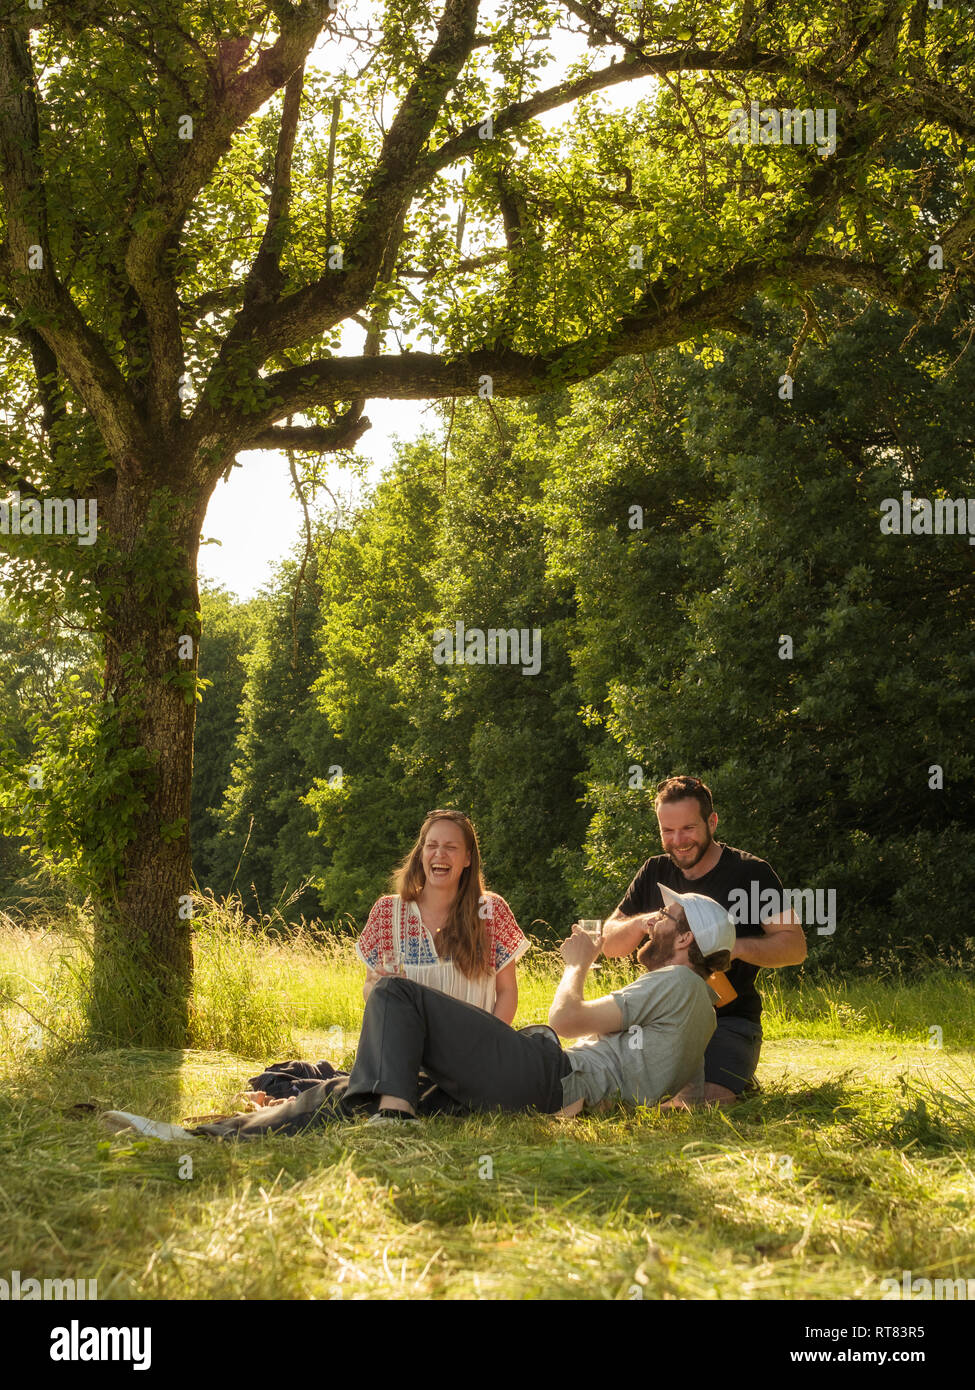 Three friends having fun together in a park Stock Photo